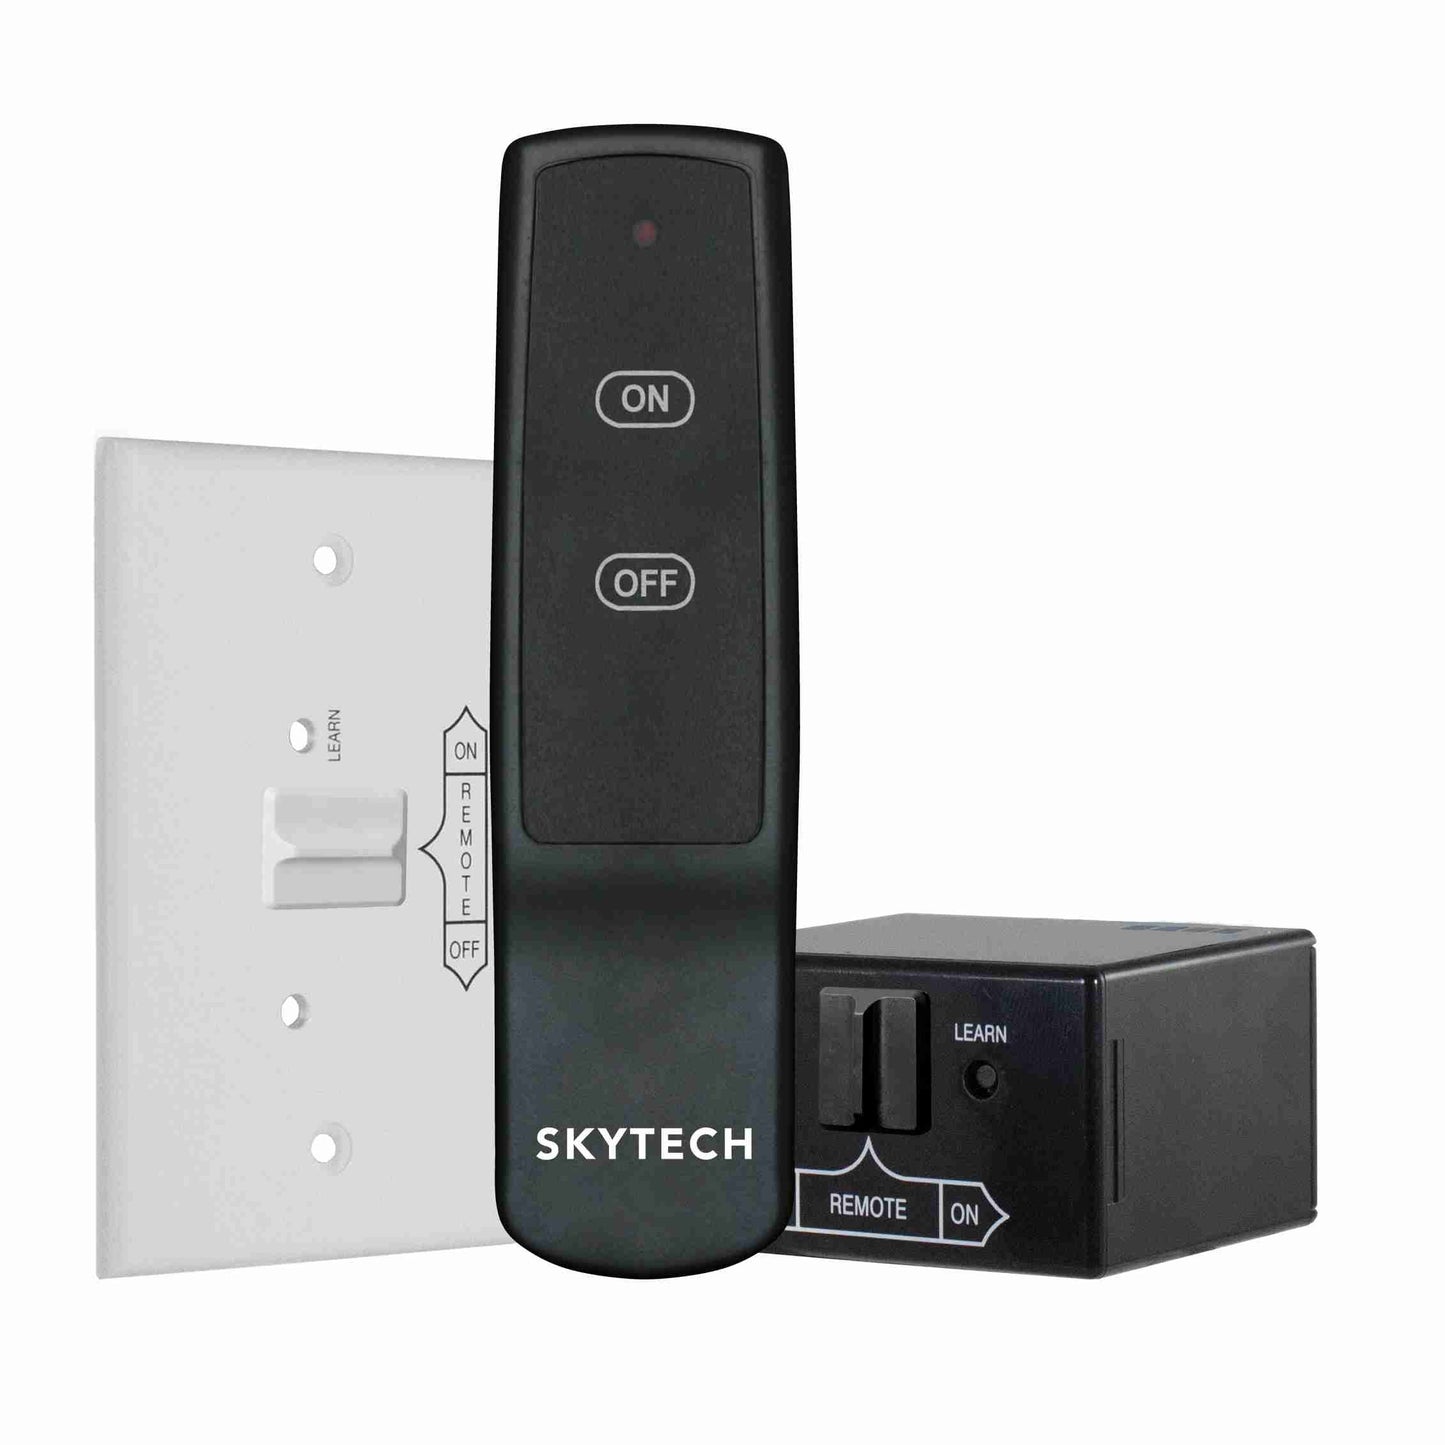 SKY1001-A | Skytech Remote Control System | On / Off Transmitter | Battery Powered Dry Contact Receiver